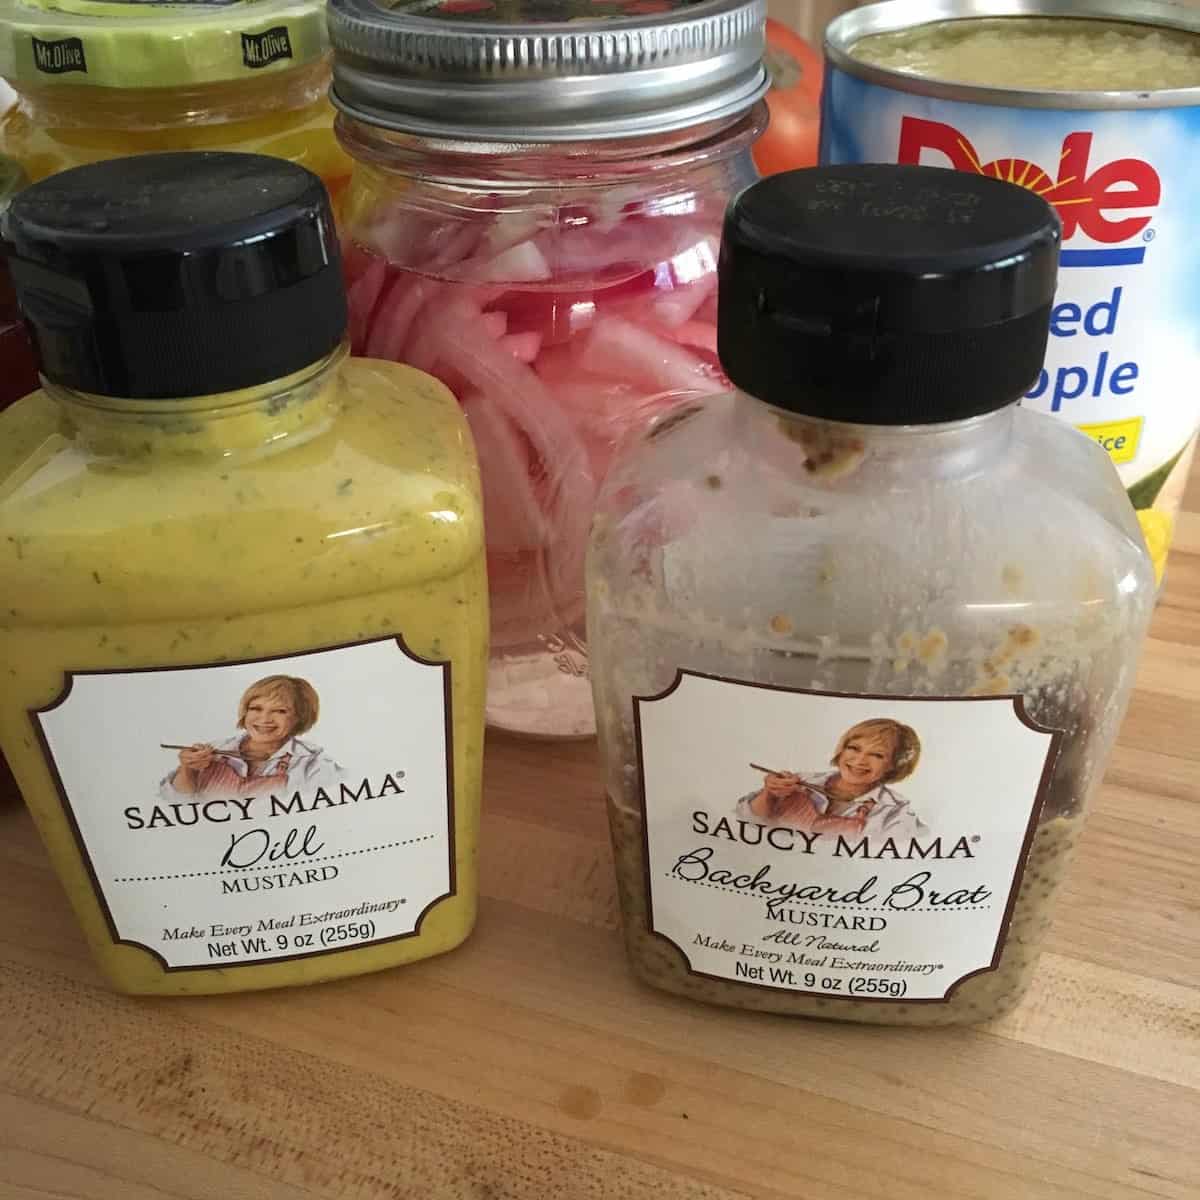 Saucy mama mustard jars, pickled onions and pineapple.